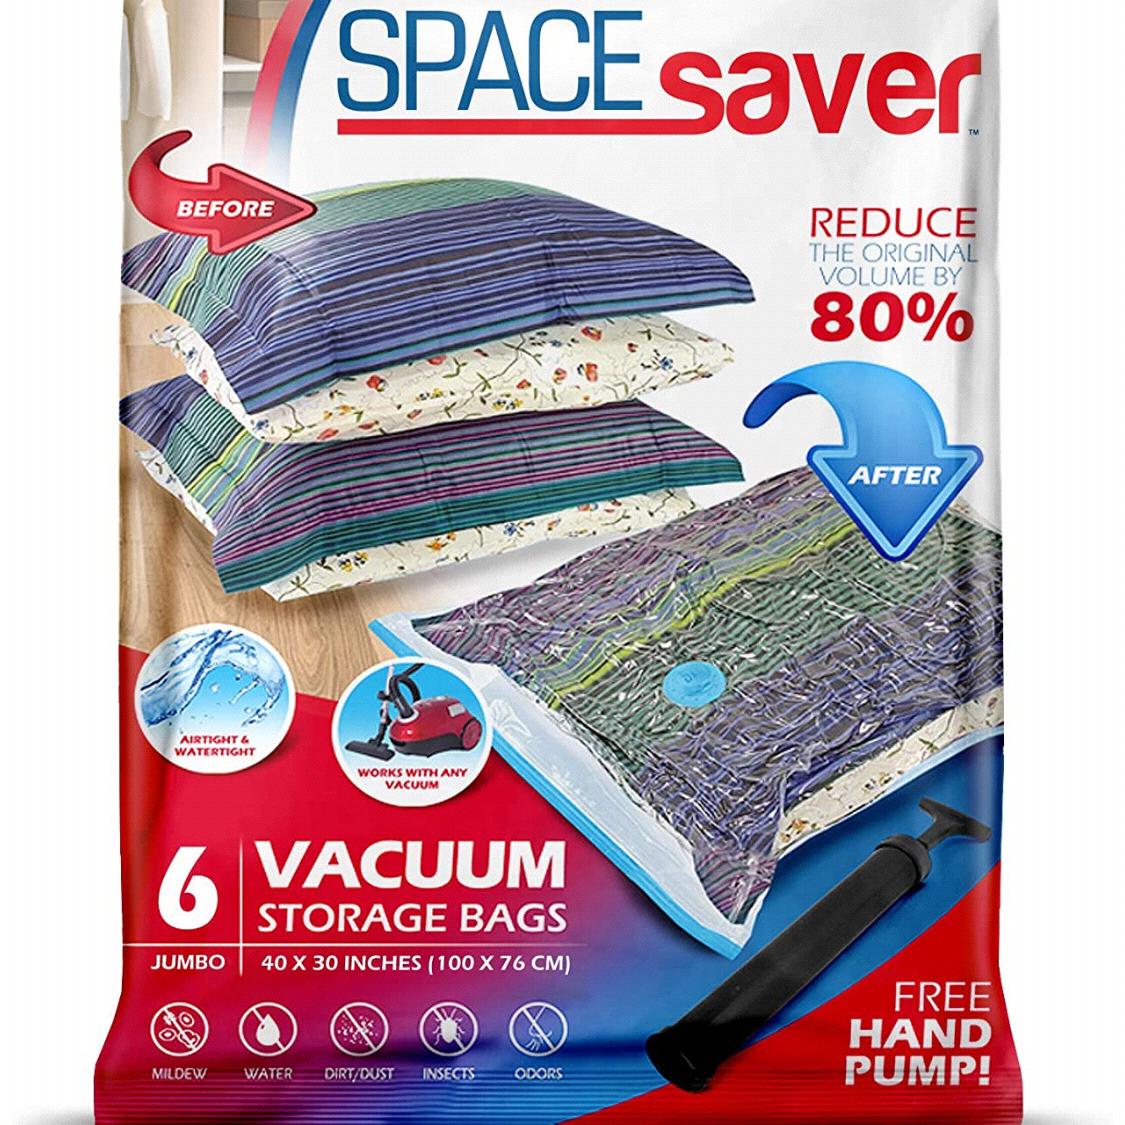 Spacesaver Premium Travel Roll-Up Storage Bags with Double-Zip Seal and  Triple-Seal Turbo Valve, Get 80% More Storage - Space Saver Bags for Travel  